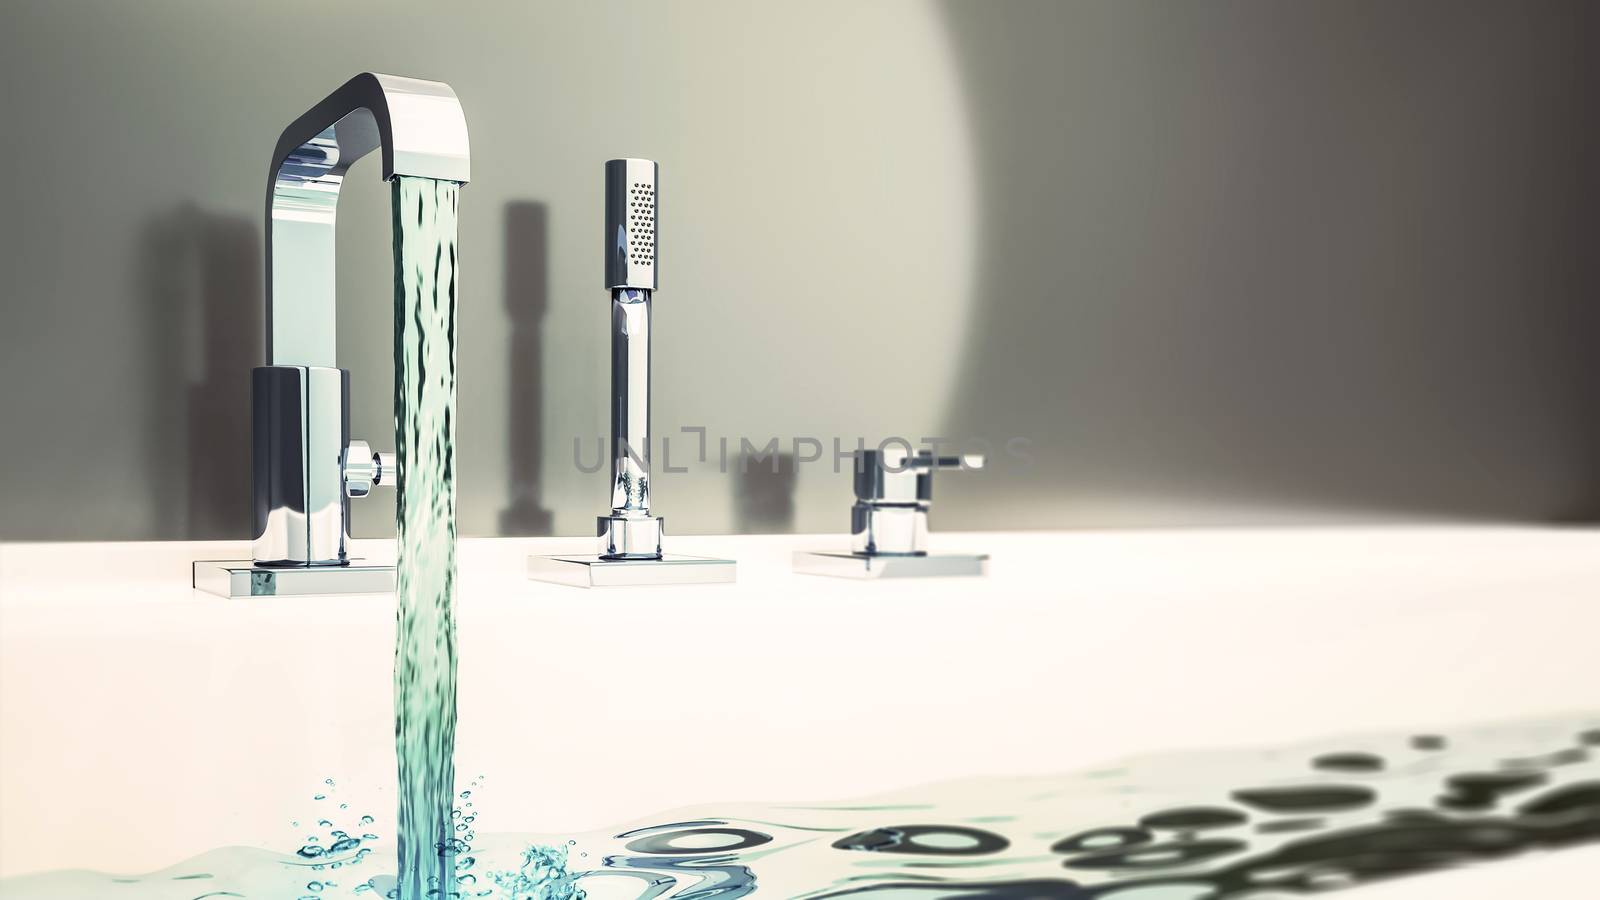 3d illustration of filling a typical bathtub with water